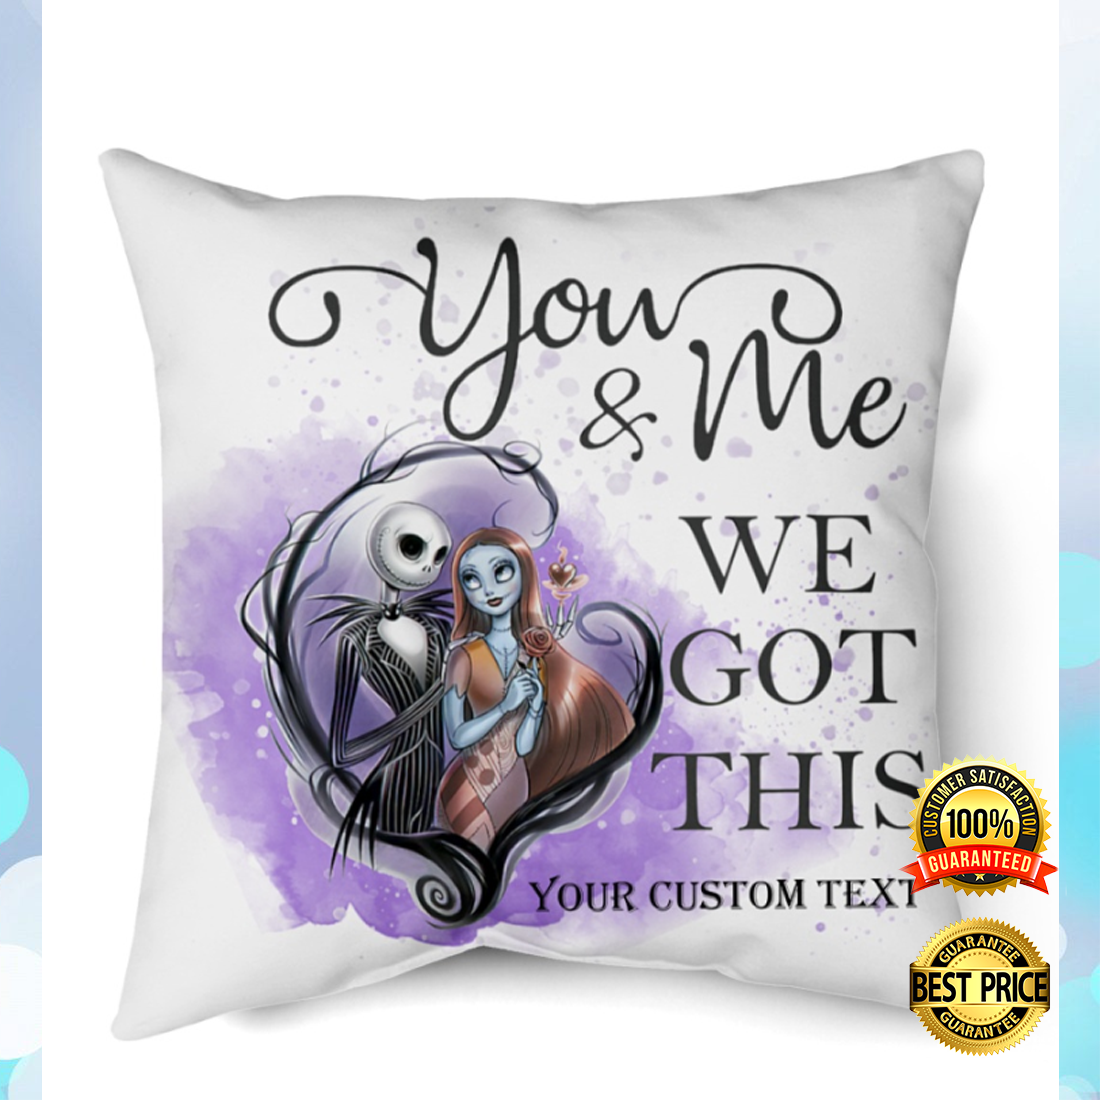 Personalized Jack and Sally you and me we got this pillow 4